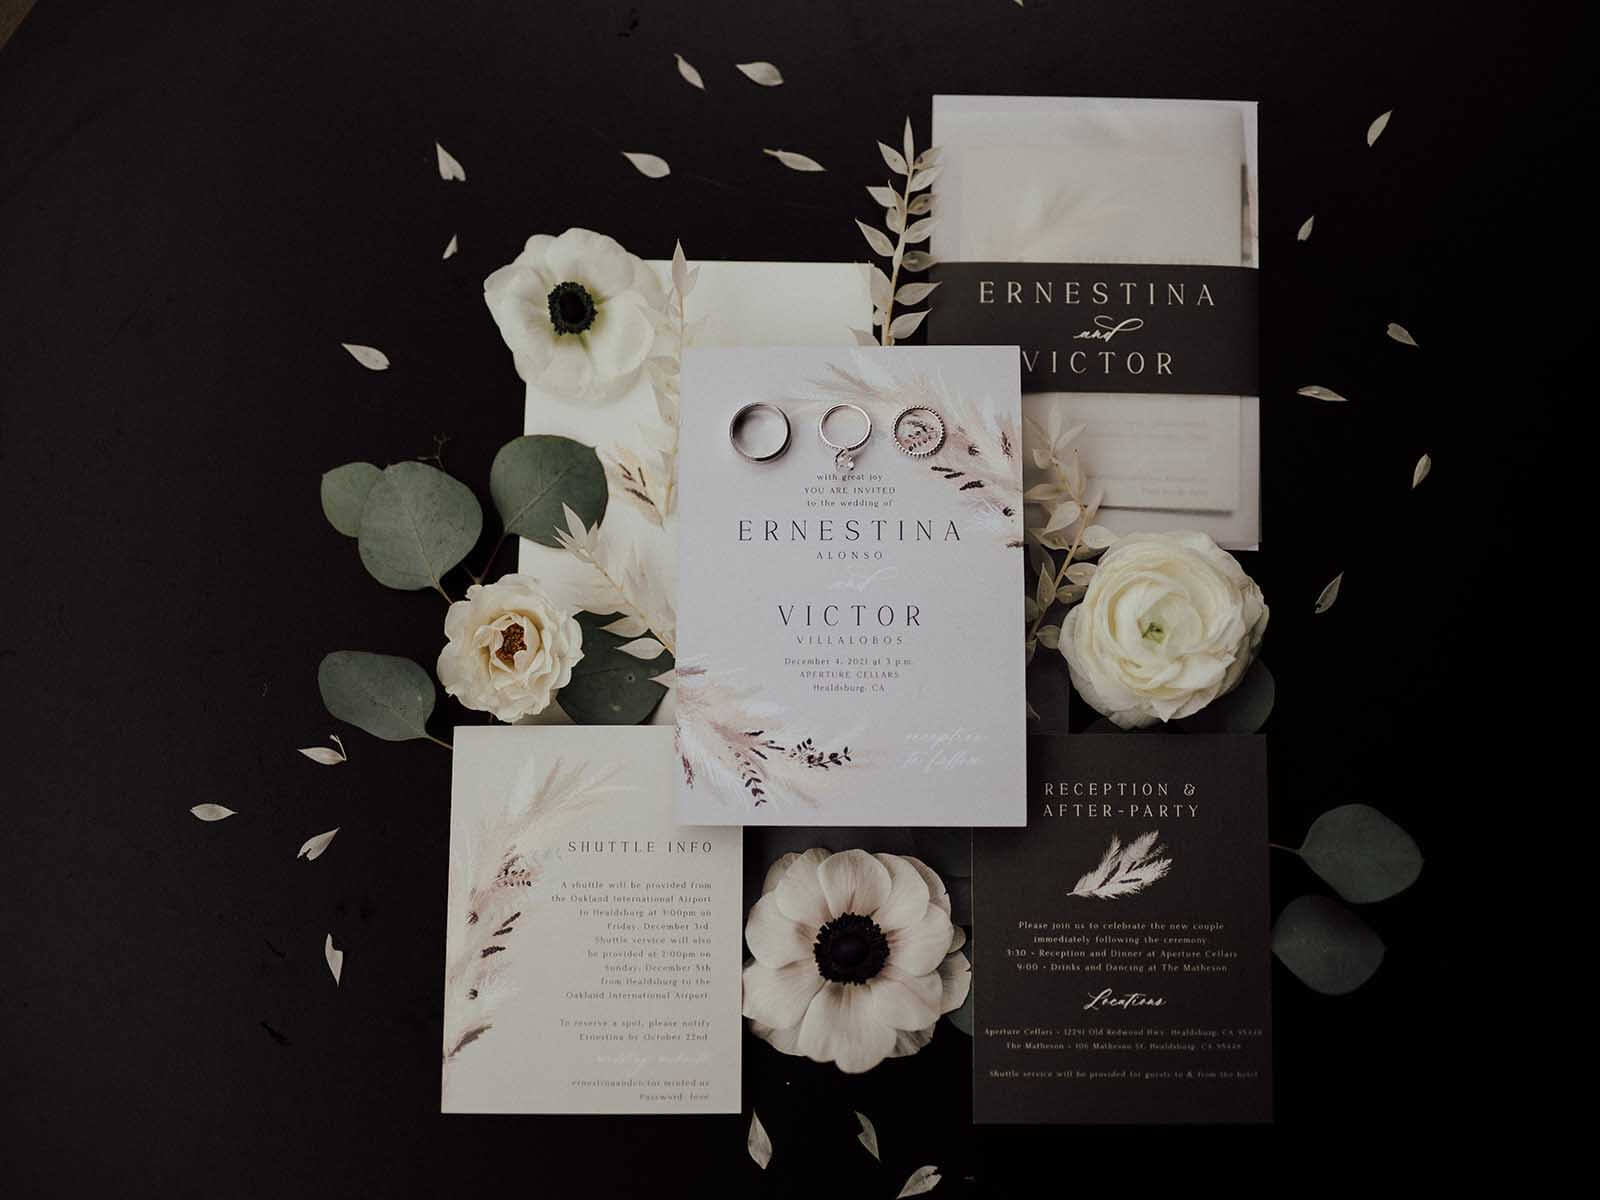 Black and white wedding invitations with flowers.